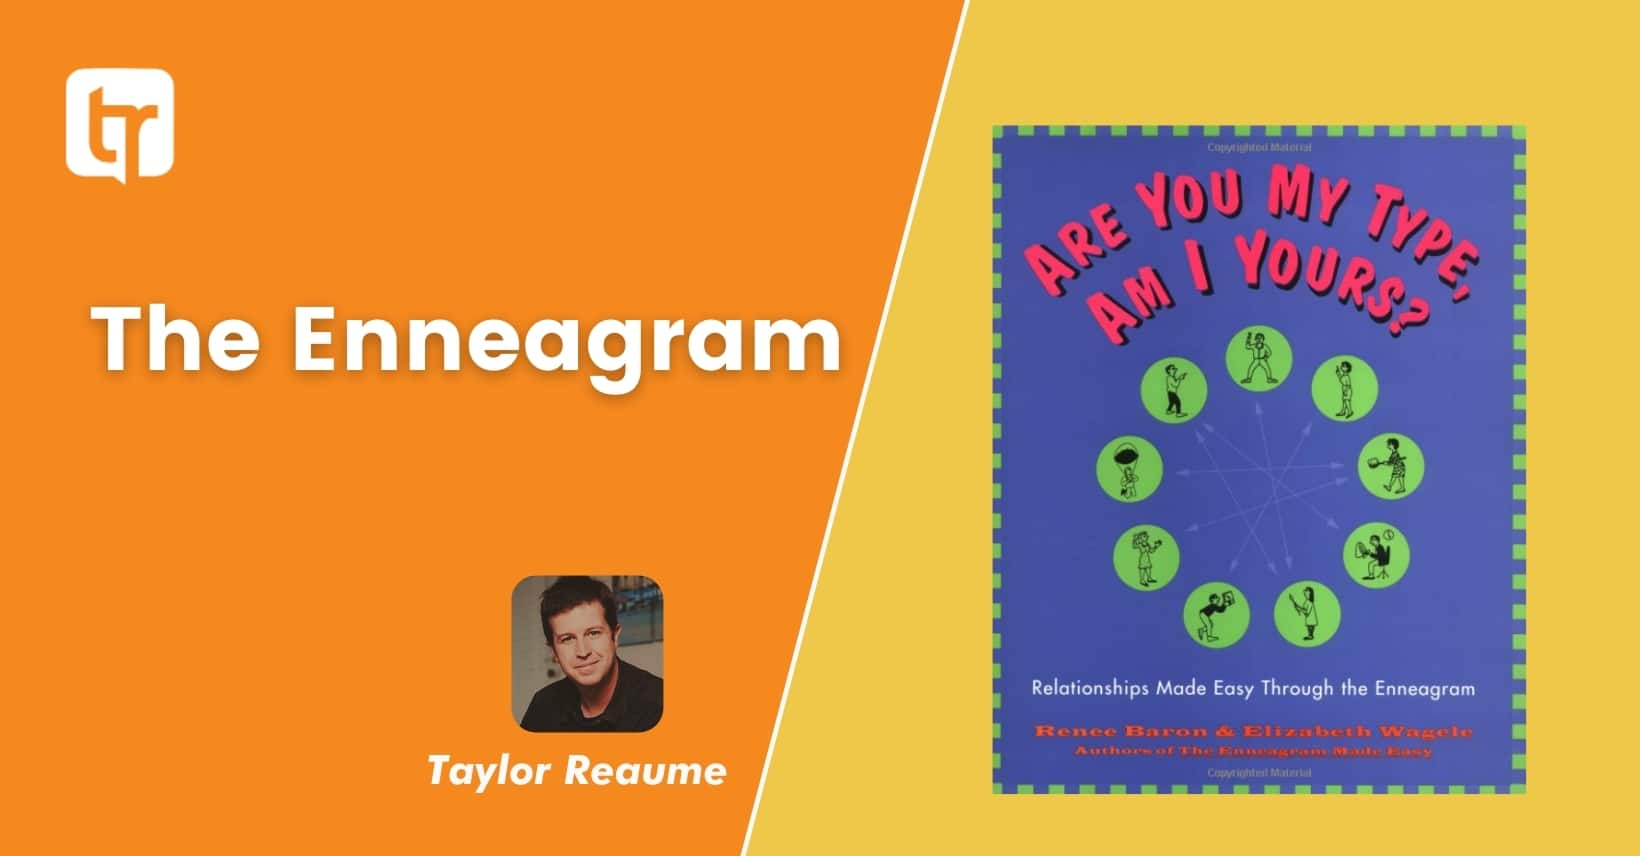 BOOK REVIEW: Are You My Type Or Am I Yours?